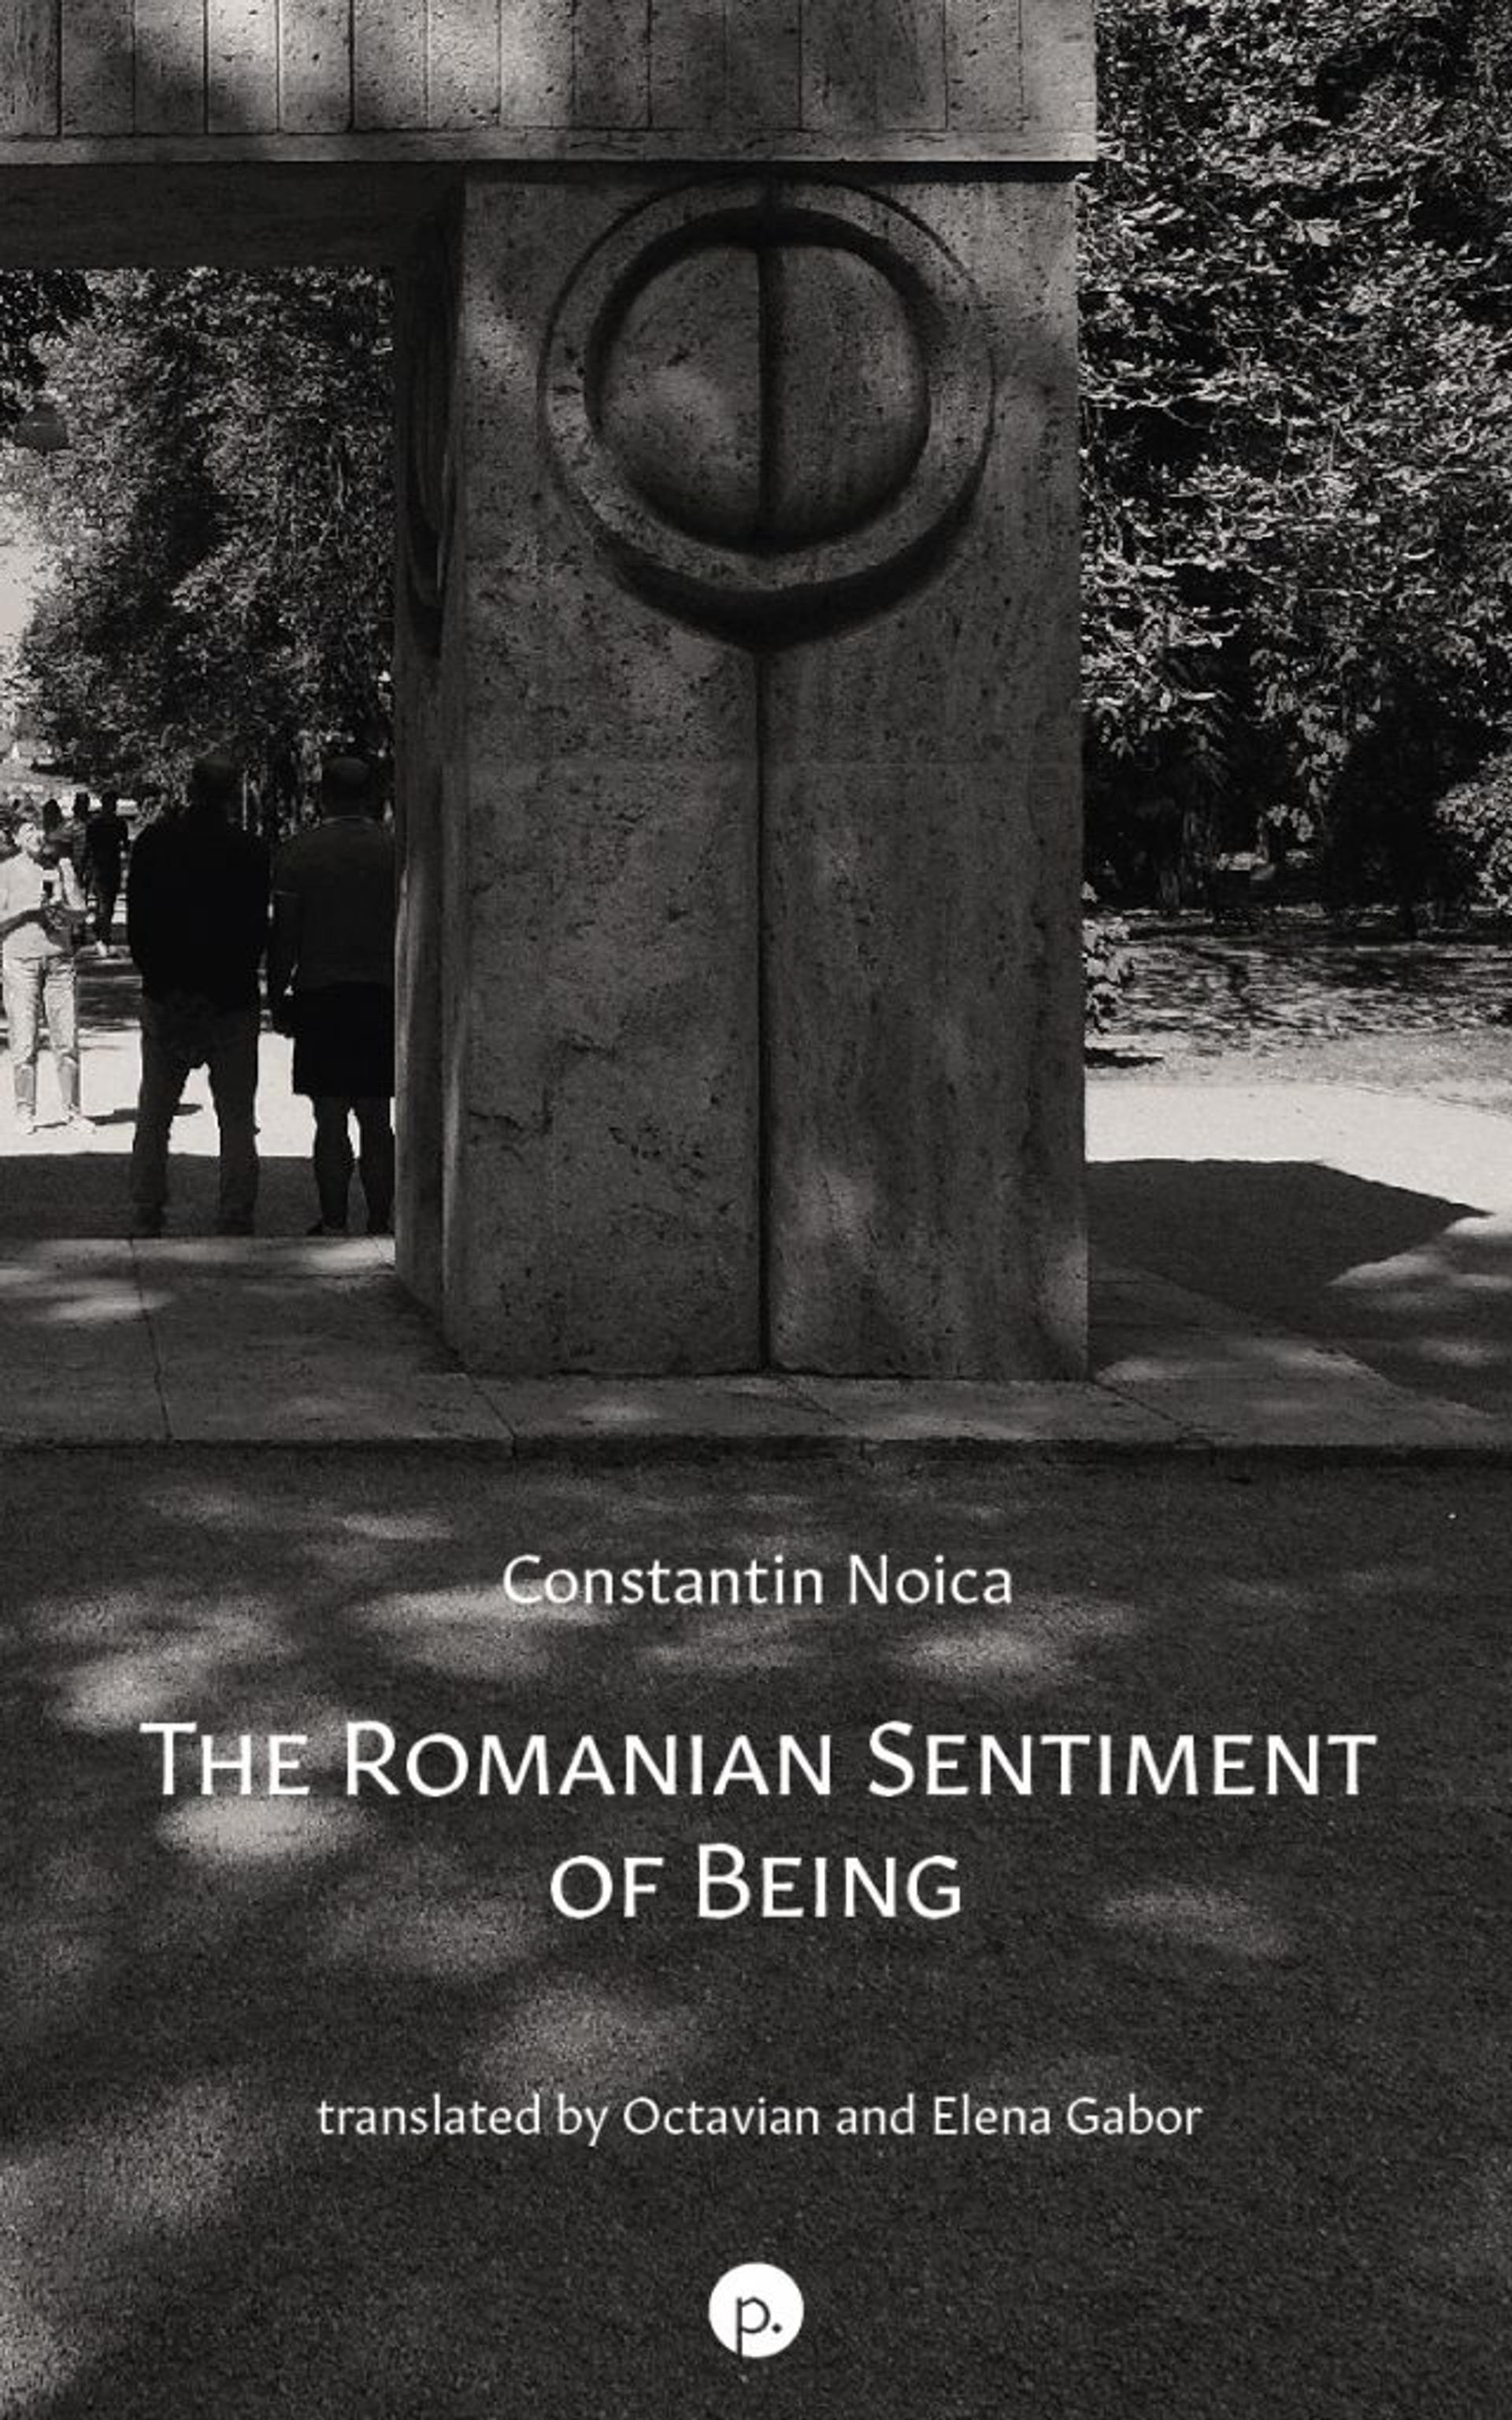 Cover of book titled The Romanian Sentiment of Being